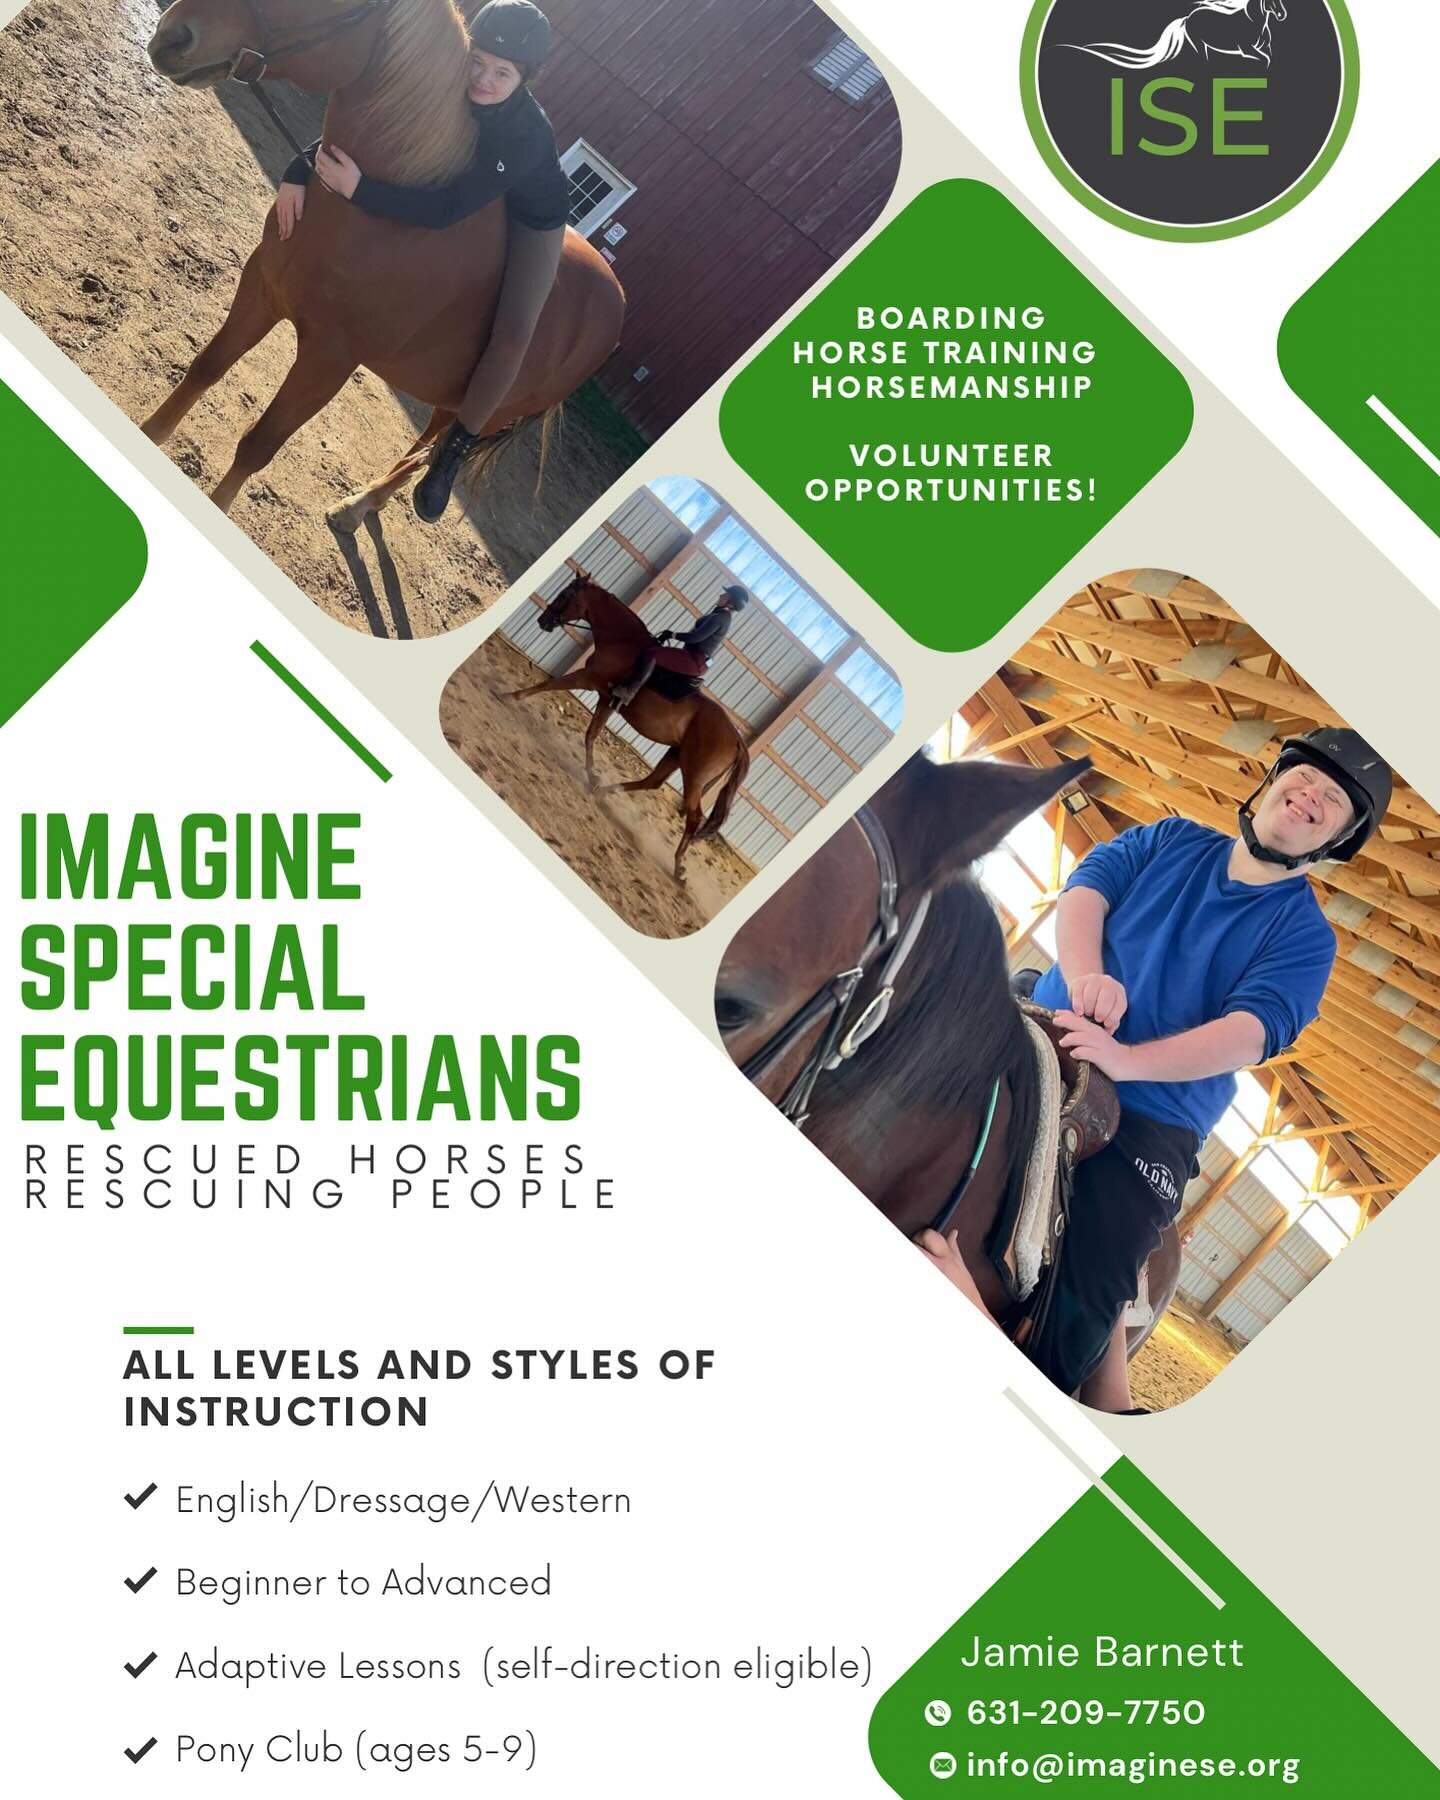 Book your riding lessons today call or text at (631)394-6173 or (631)209-7750
E-mail us at info@imaginese.org